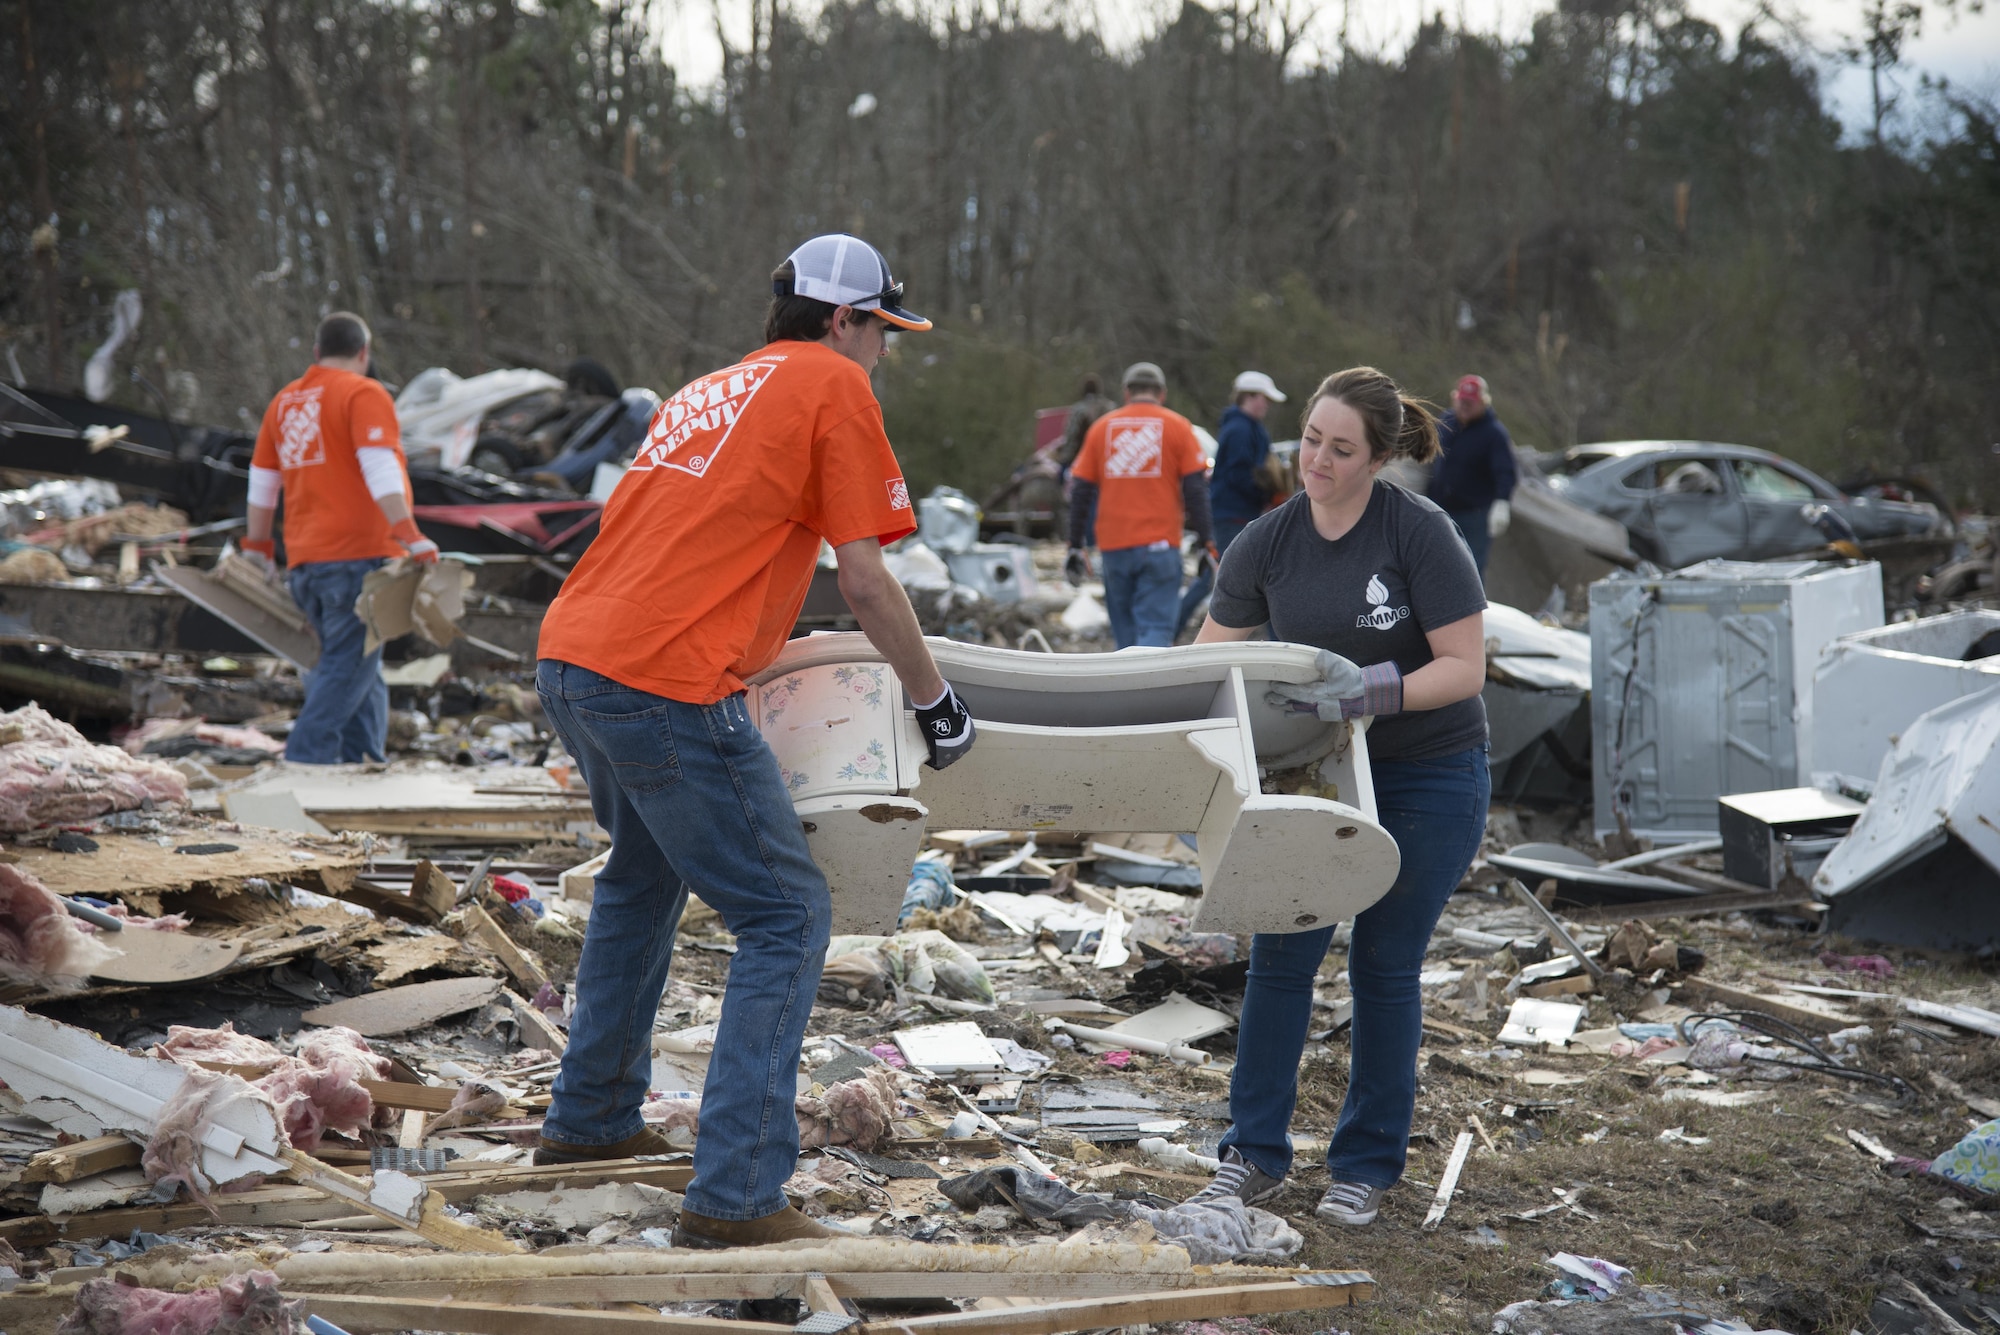 A Moody Air Force Base Airman and another volunteer team up to carry salvageable furniture out of the debris left in the wake of a tornado, Jan. 28, 2017, in Adel, Ga. The tornado killed 15 people and was later deemed an EF3, the strongest tornado to touch down in the county’s history. (U.S. Air Force photo by 2d Lt. Kaitlin Toner)